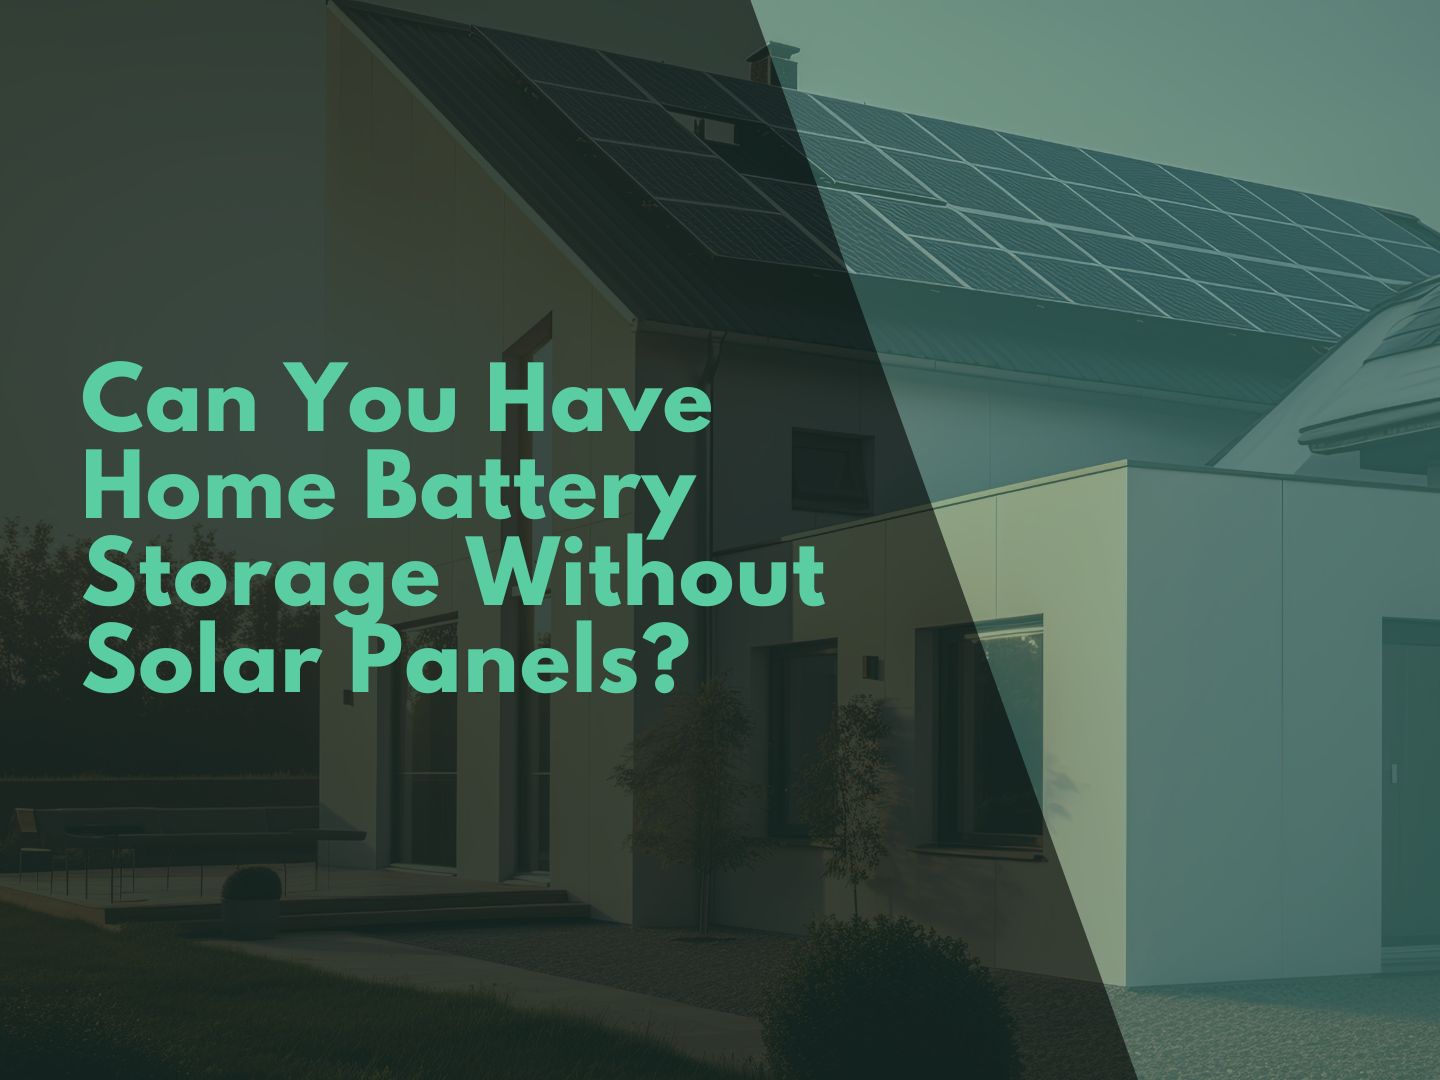 Can You Have Home Battery Storage Without Solar Panels?